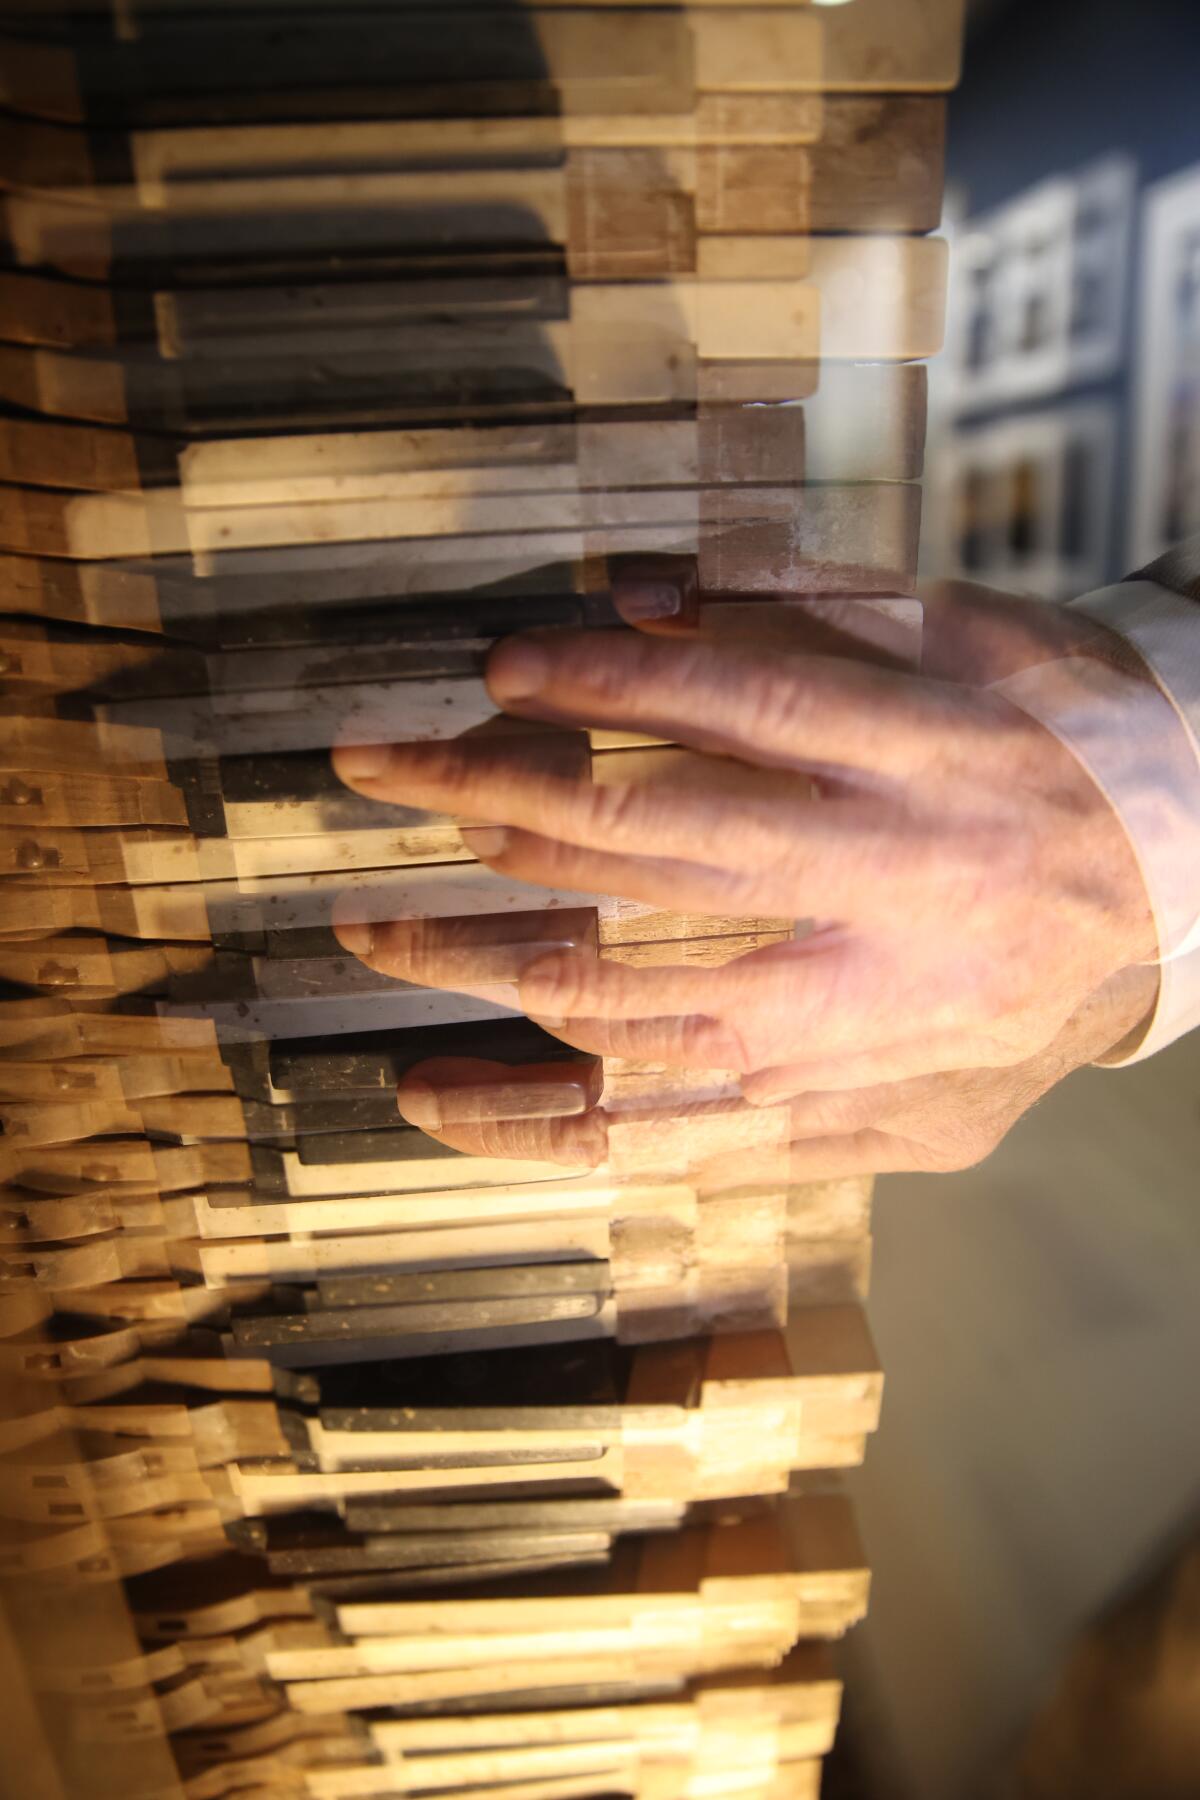 A blurred image of a person's hand playing keys of an antique piano